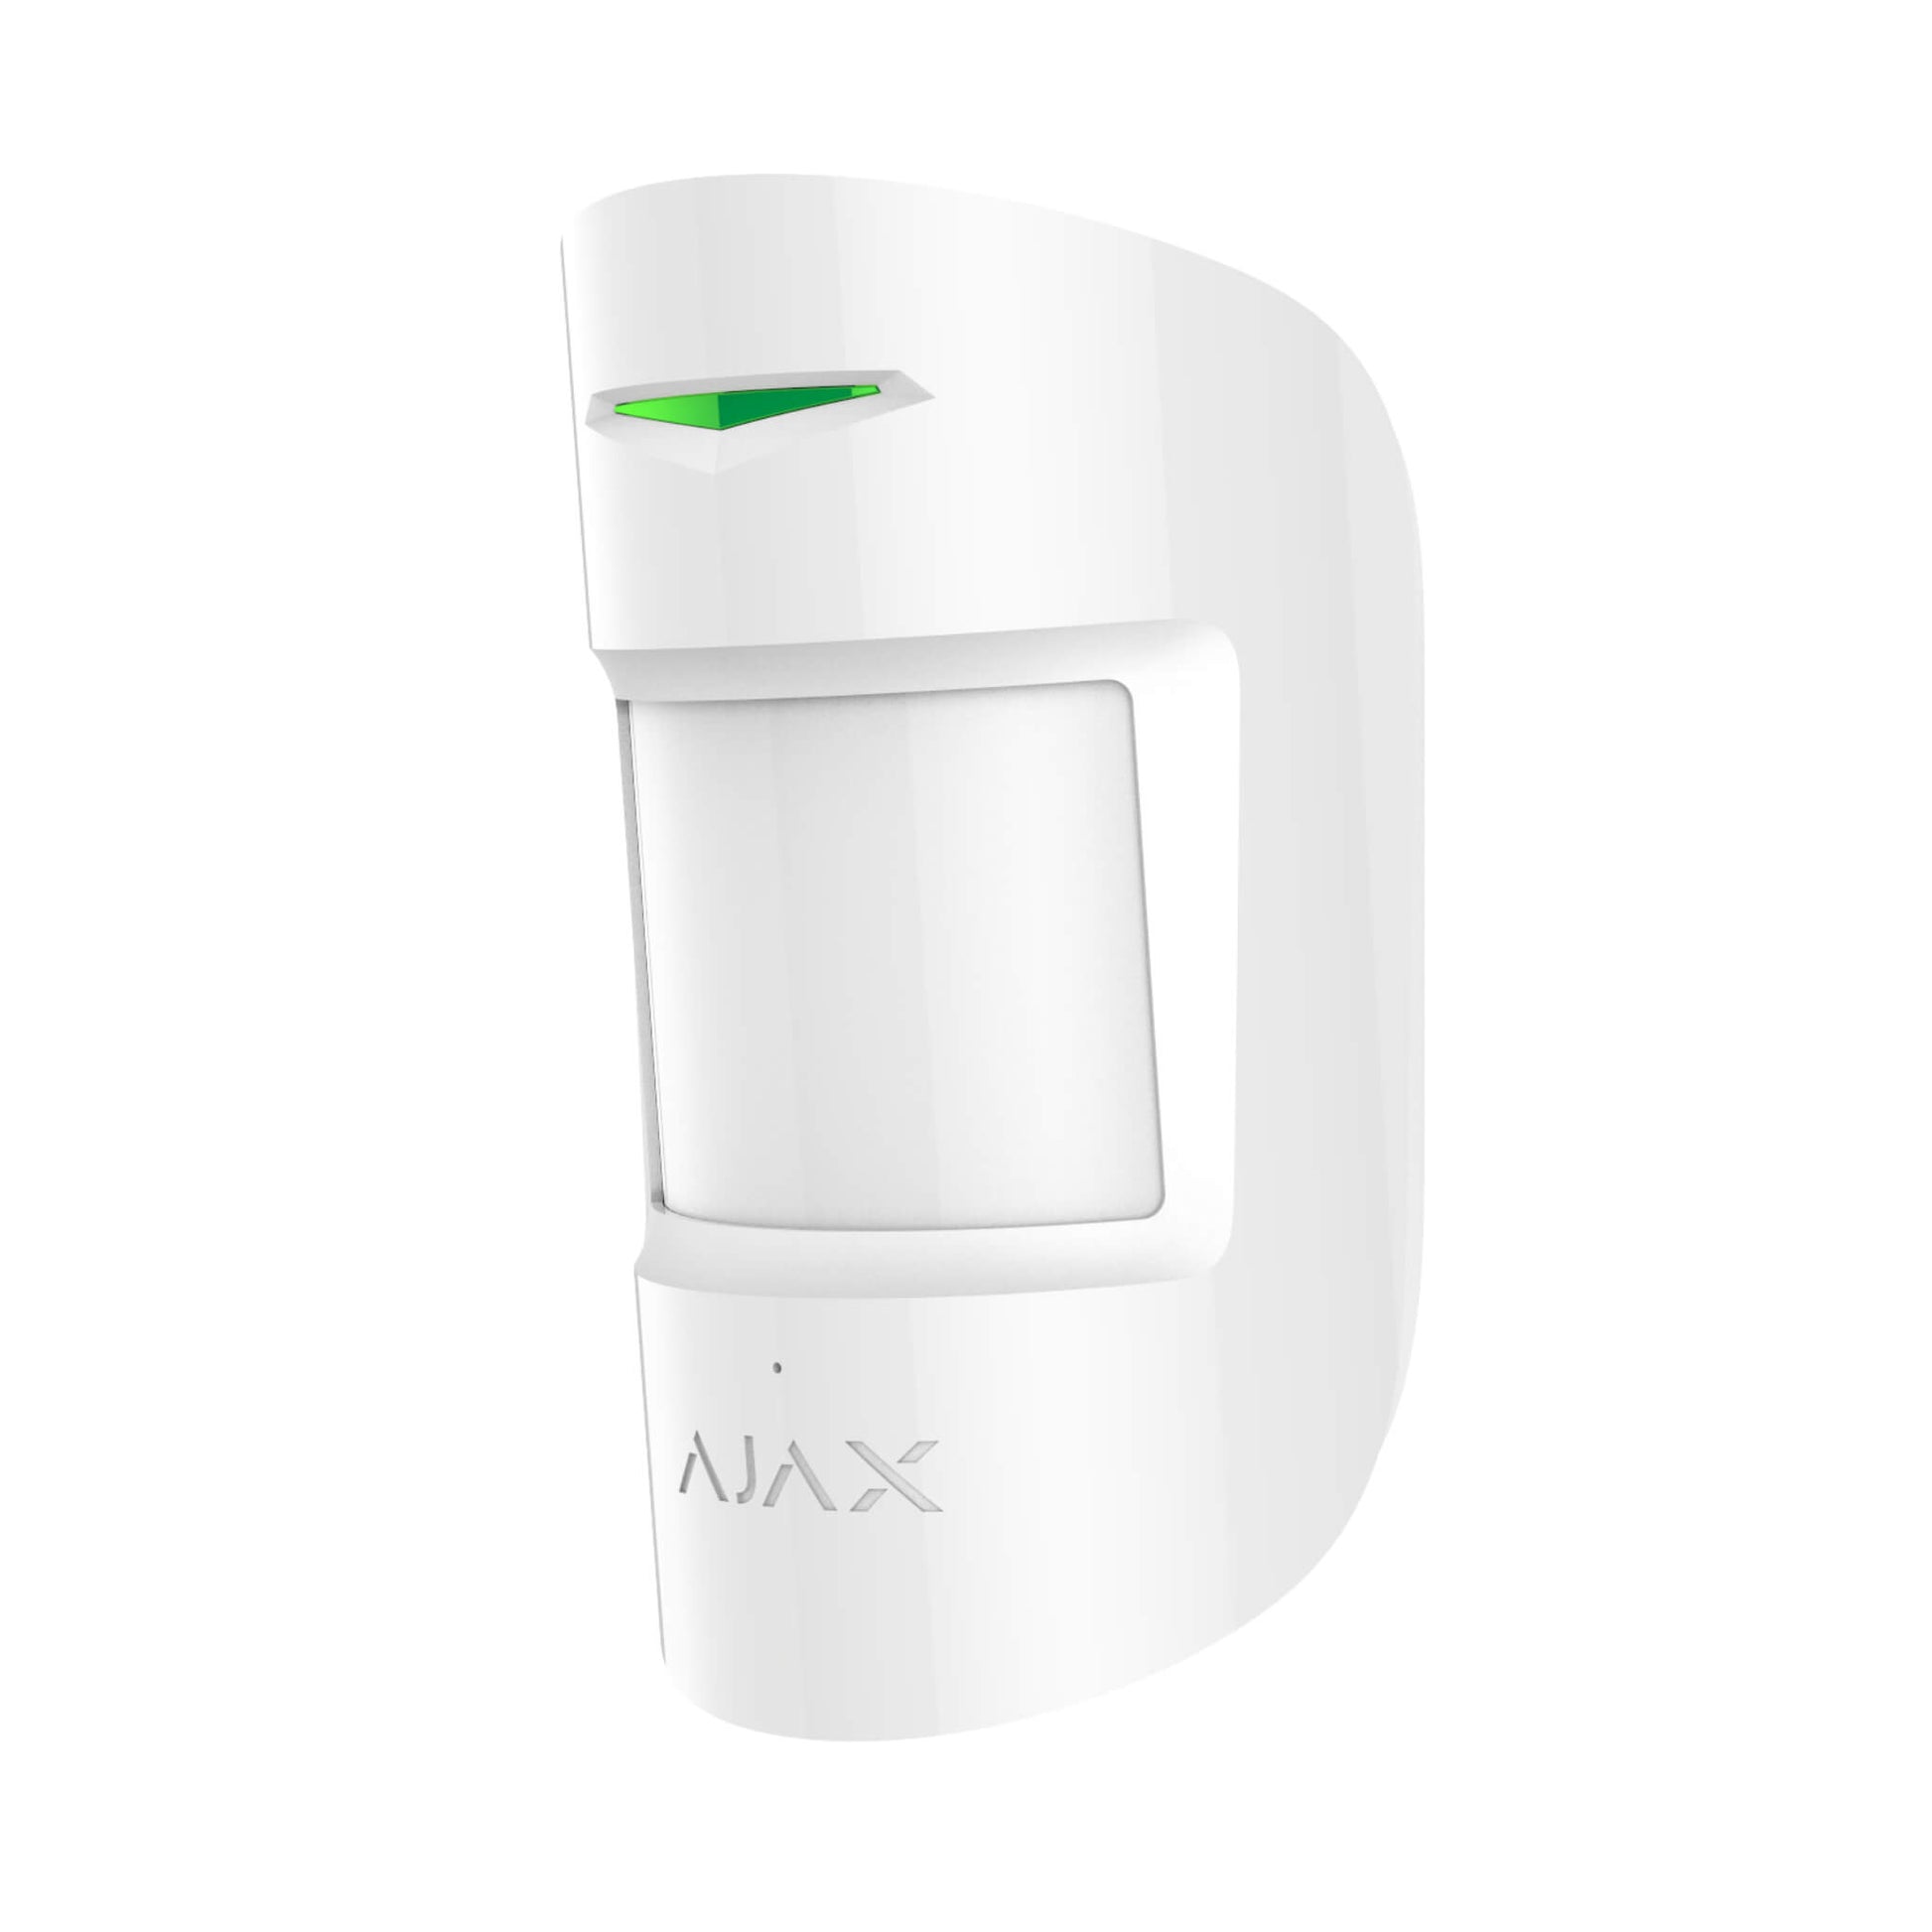 White Ajax CombiProtect Motion and vibration sensor for indoor or outdoor installations for home and business security, 110 × 65 × 50 mm in size, 92 grams in size. Turned right view of device 